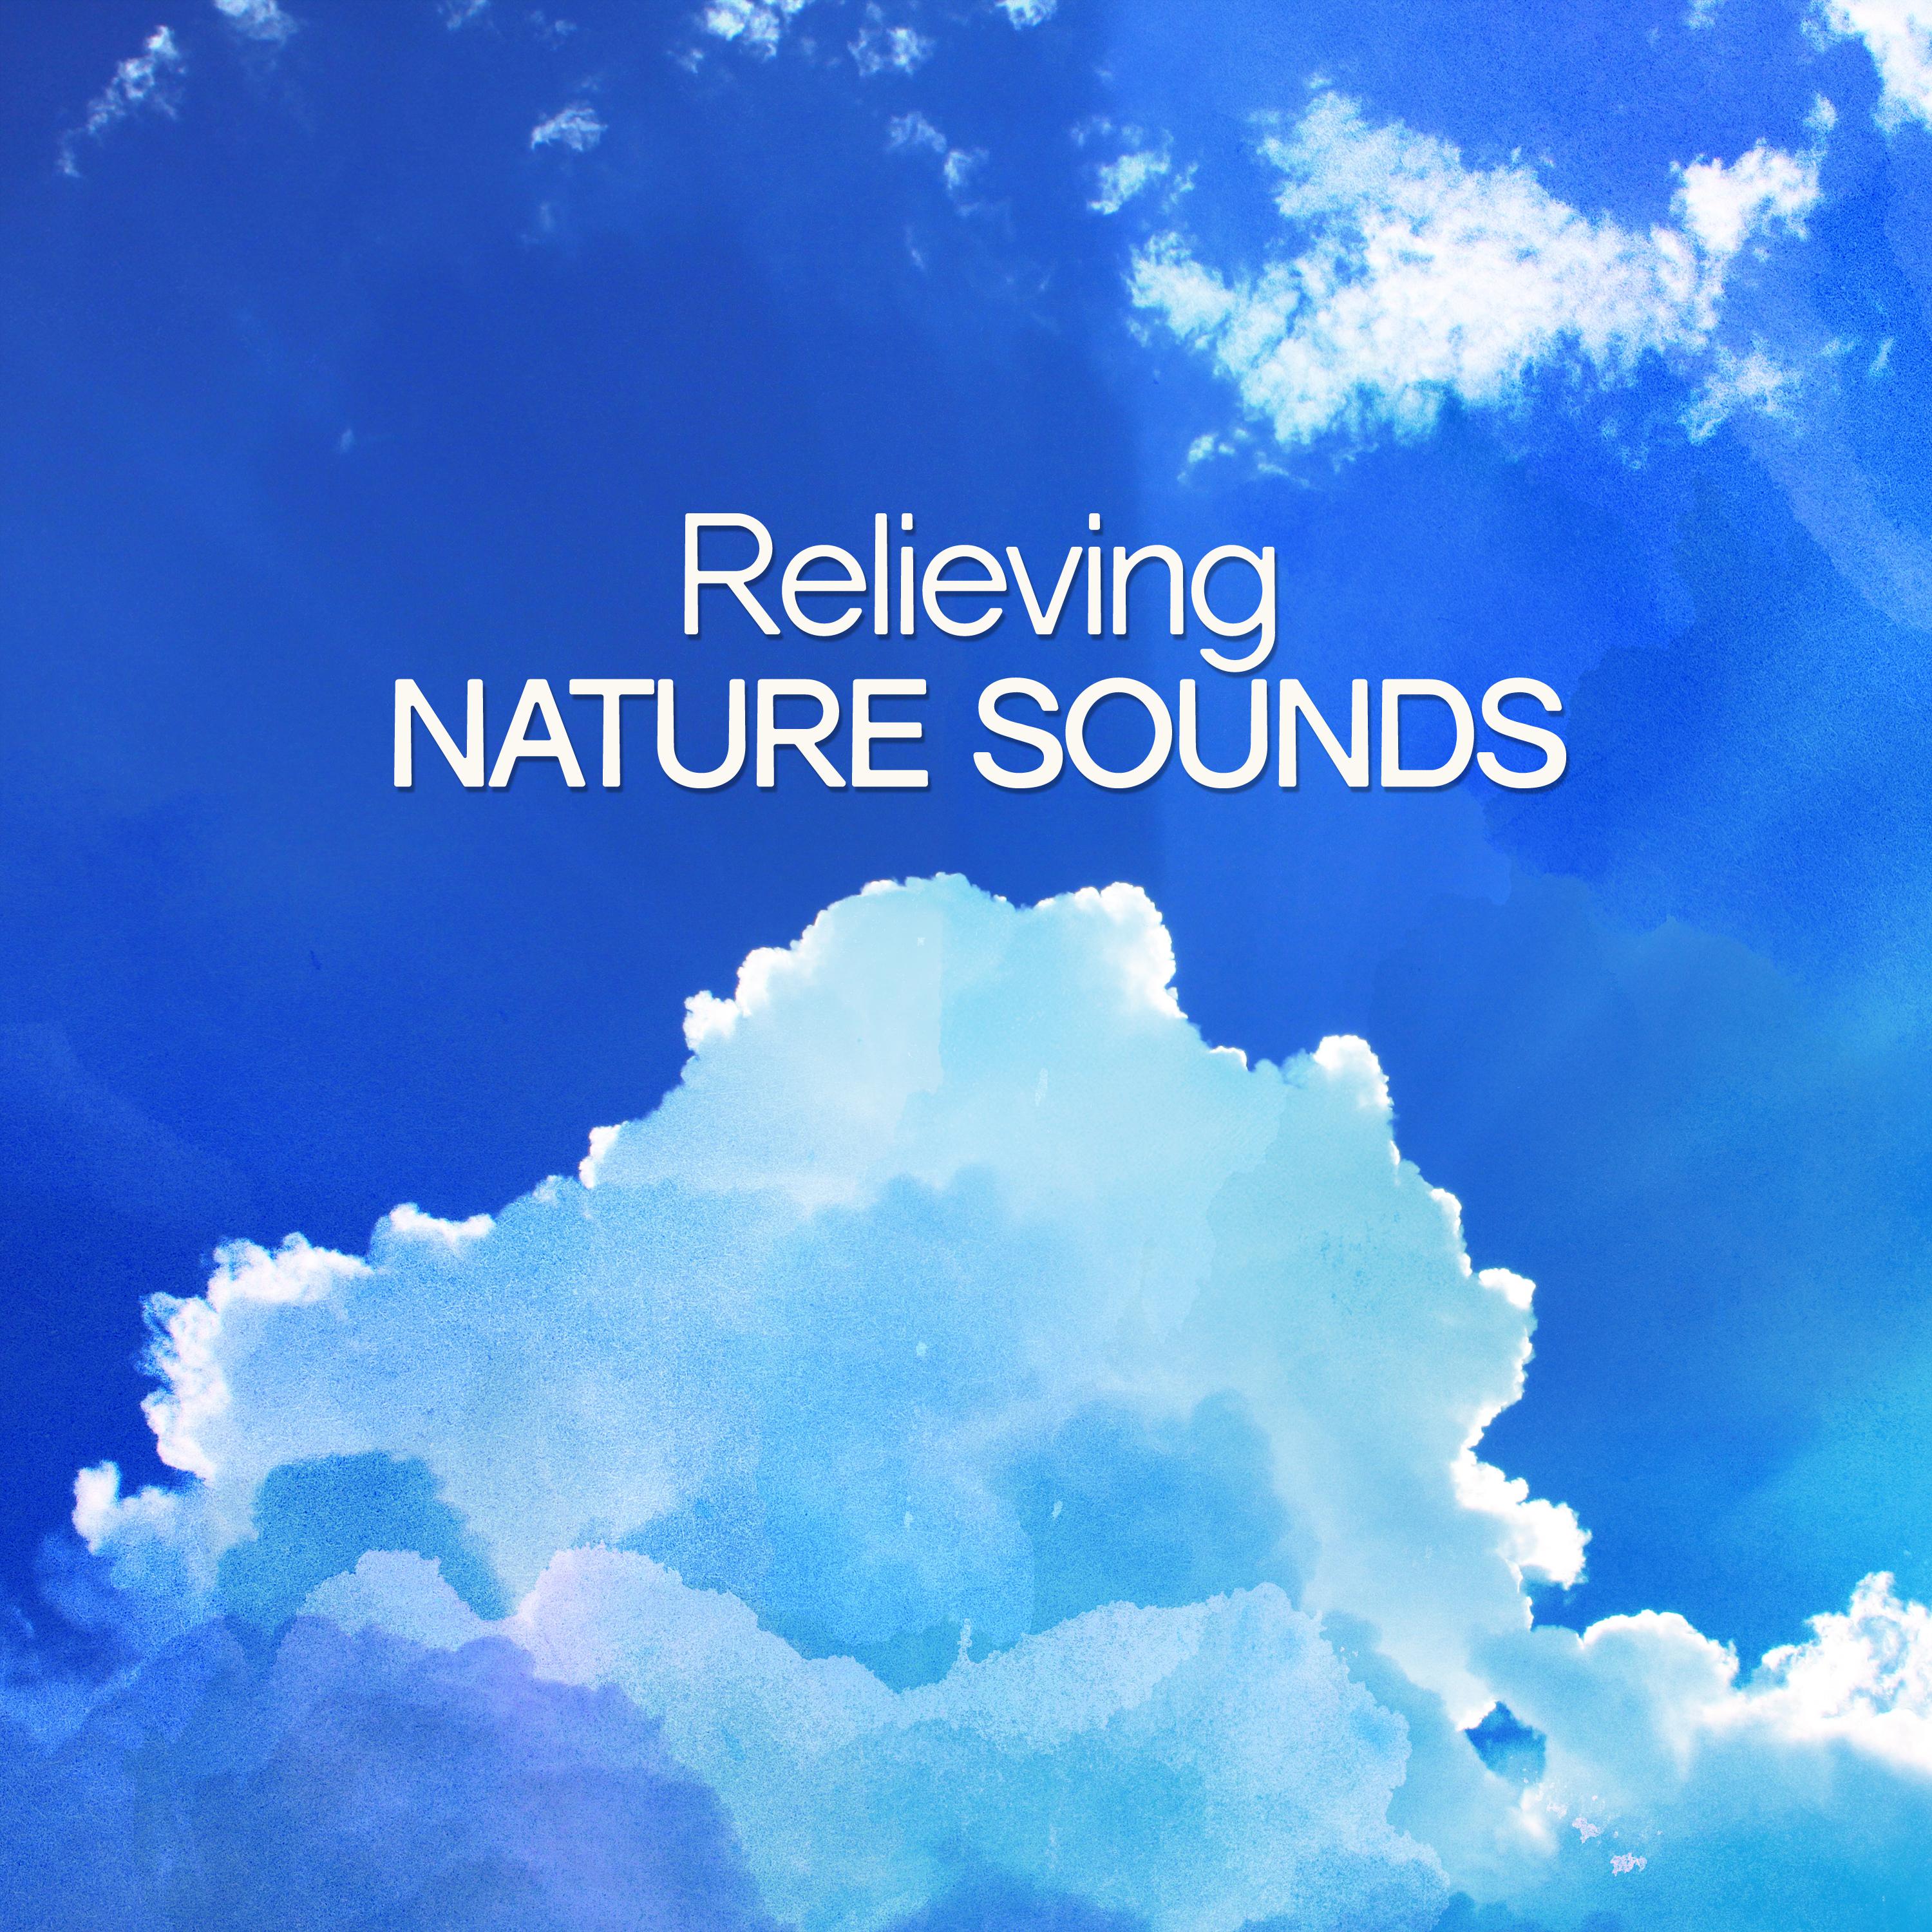 Relieving Nature Sounds